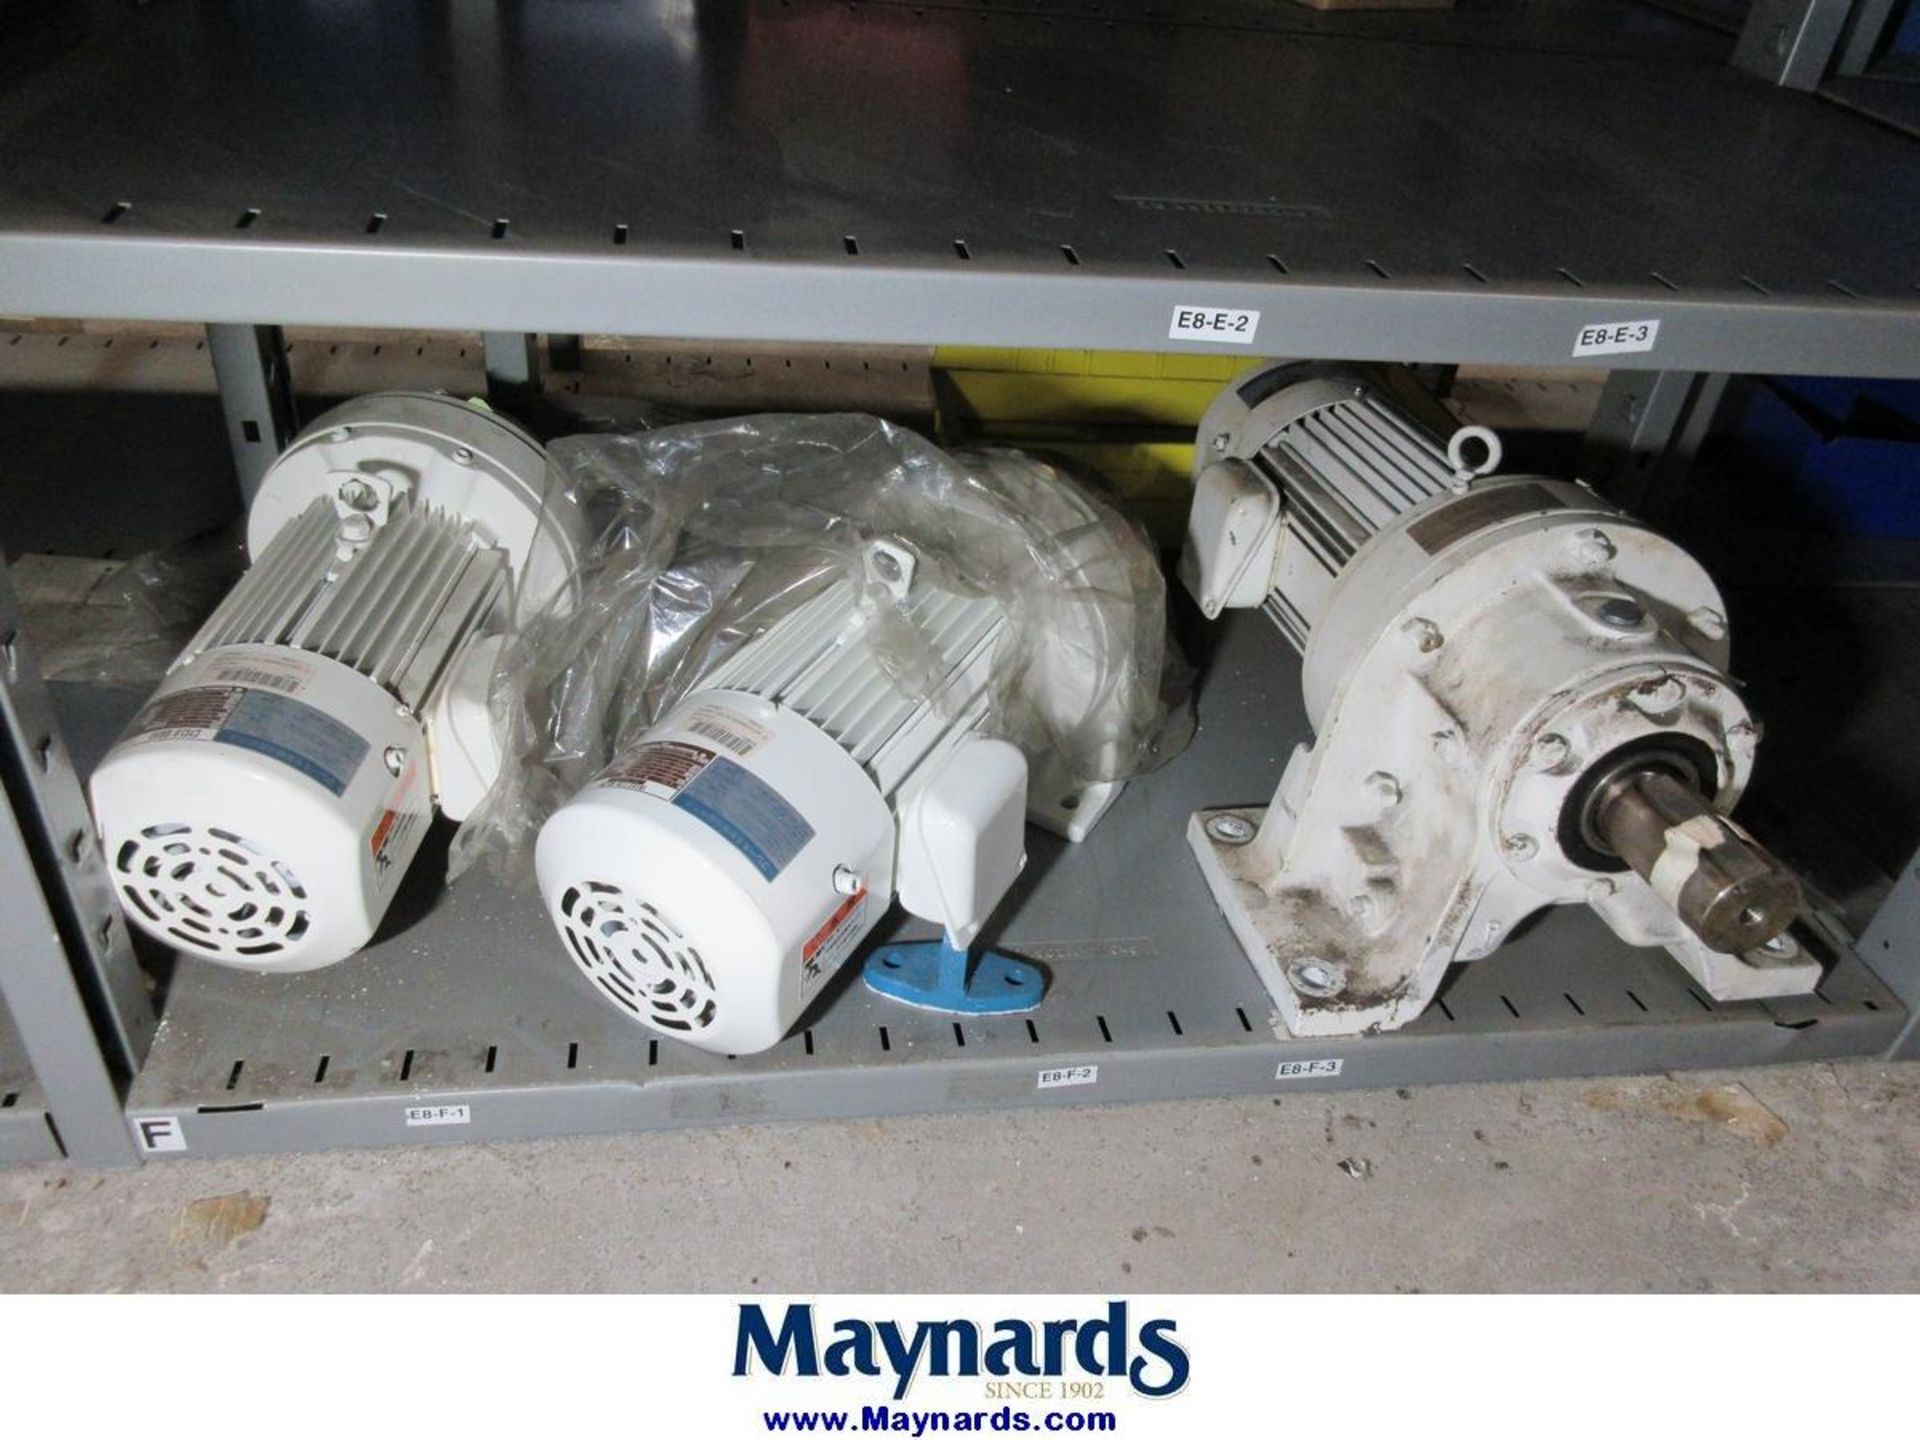 Large Lot of Electrical Controls, PLC's, Drives & Remaining Contents of Maint. Parts Crib - Image 81 of 107